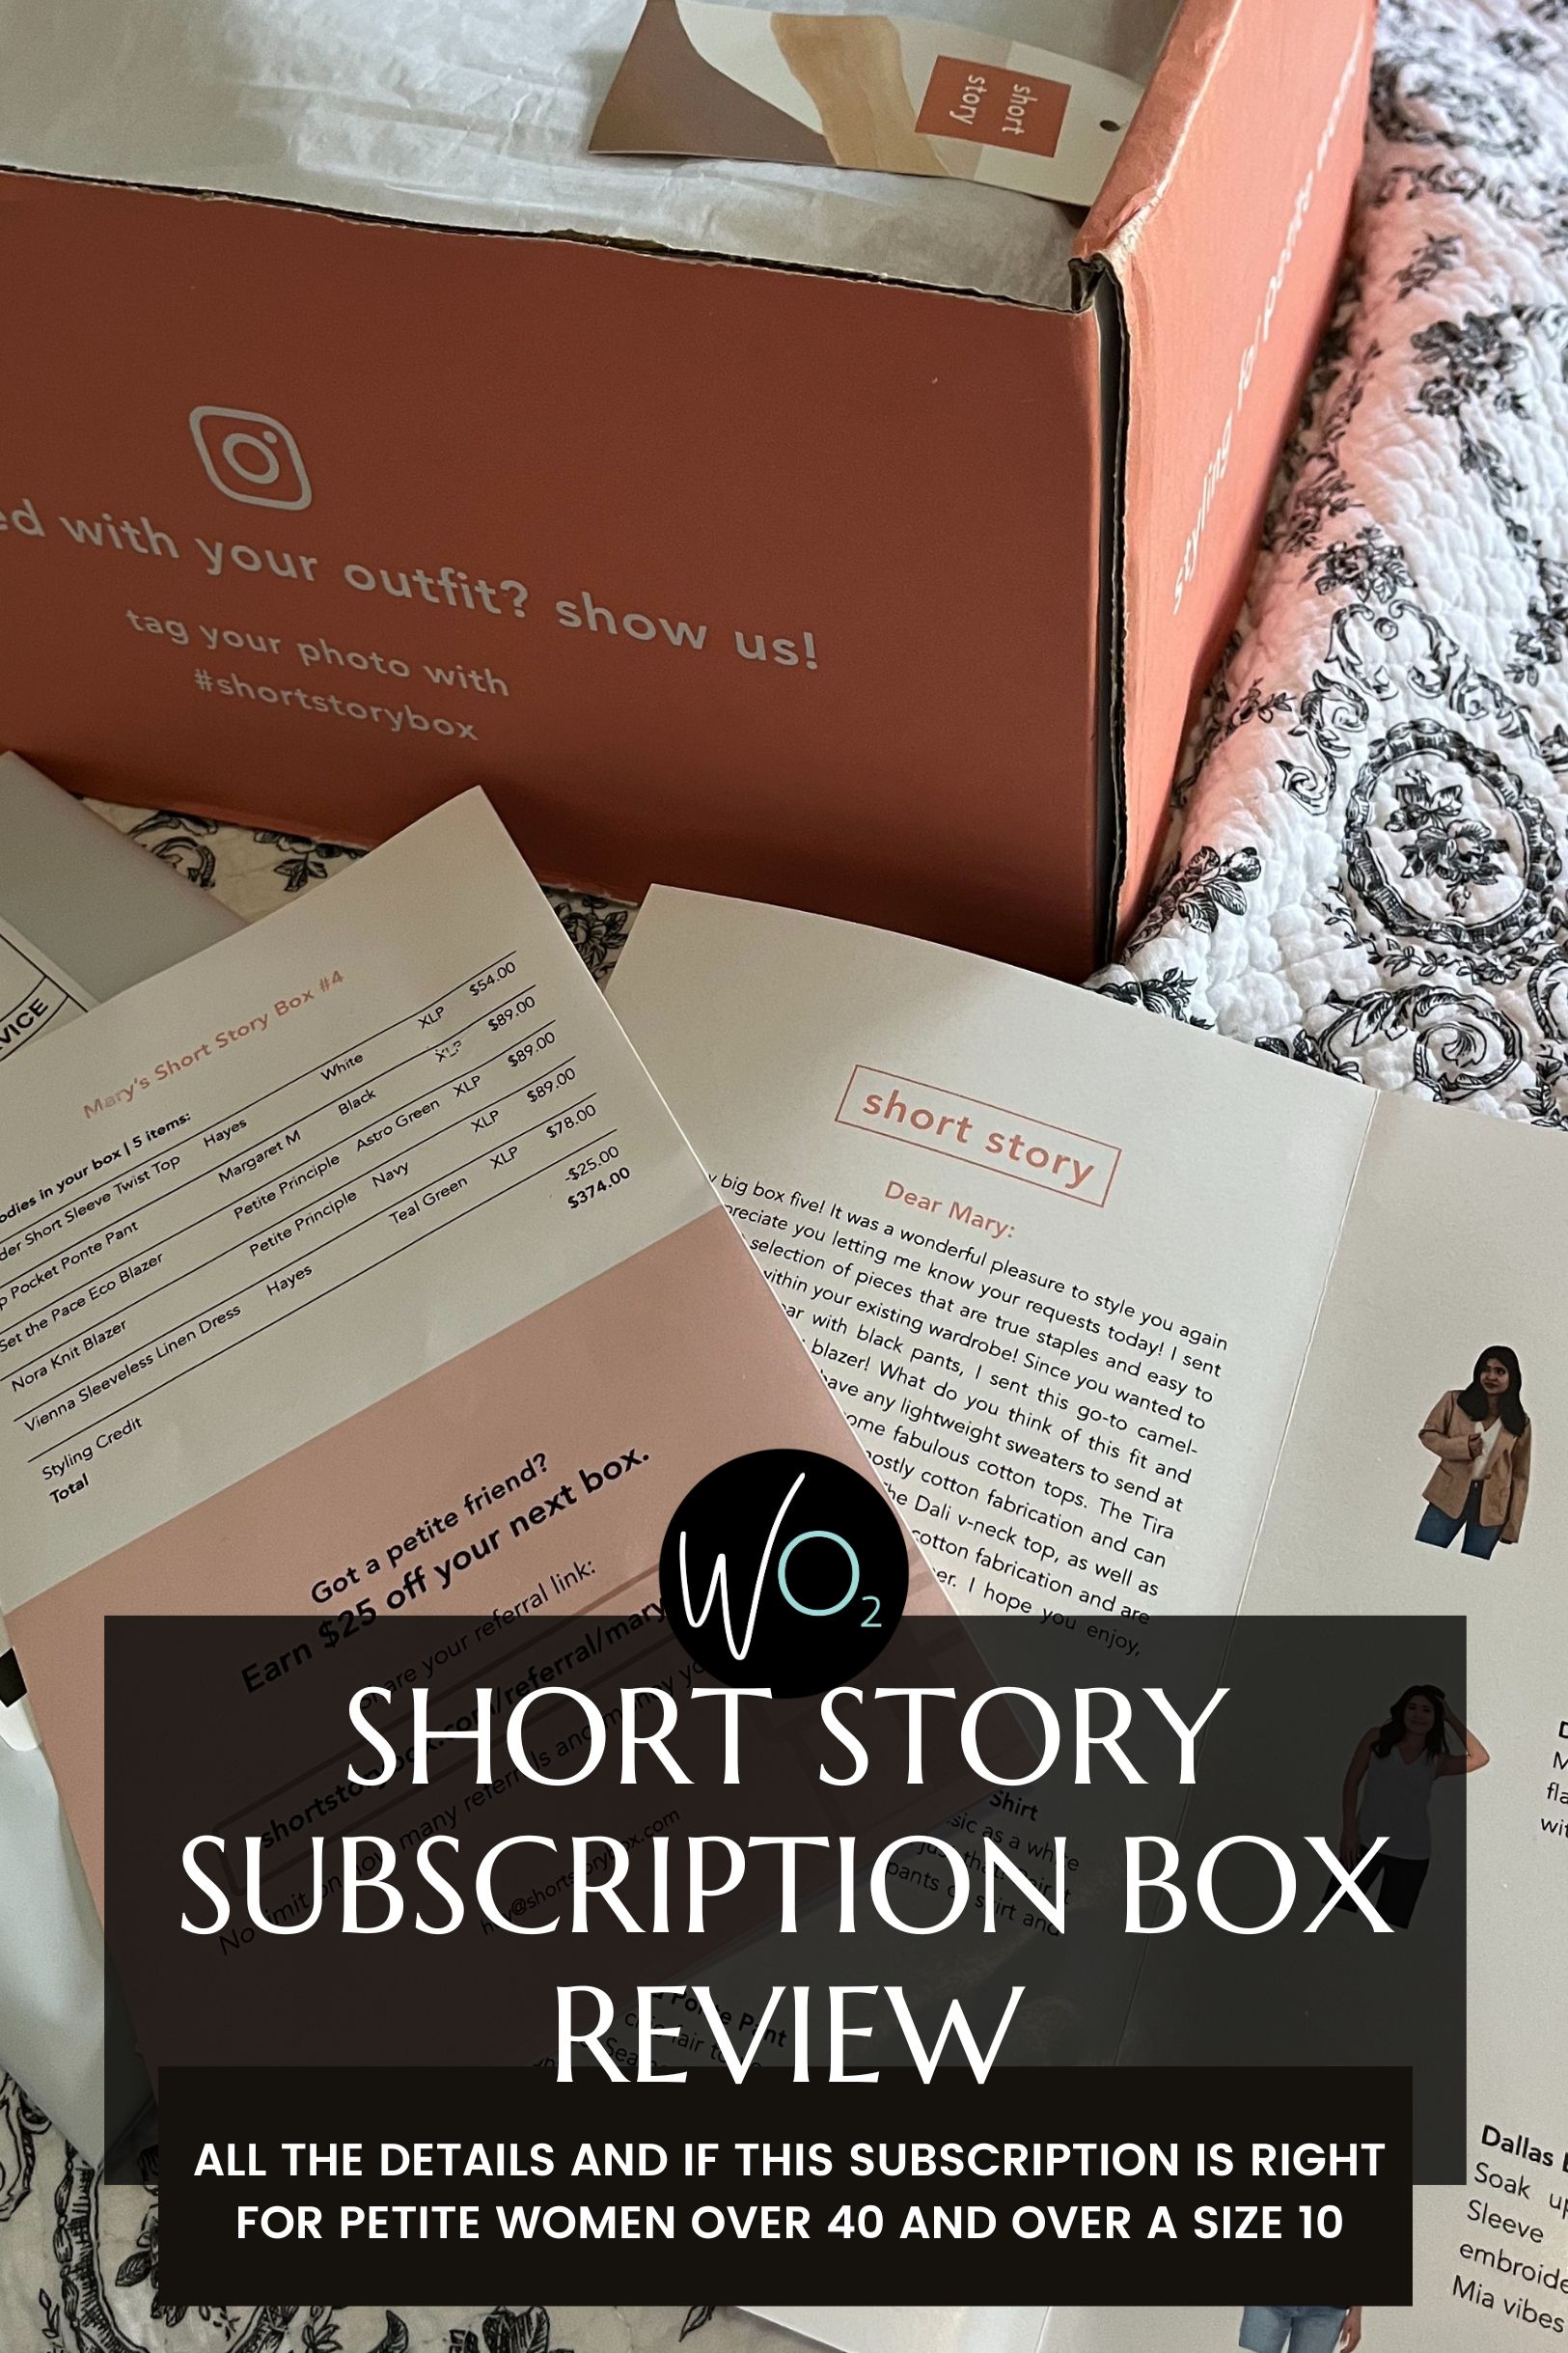 Short Story Box Review from a Real Customer